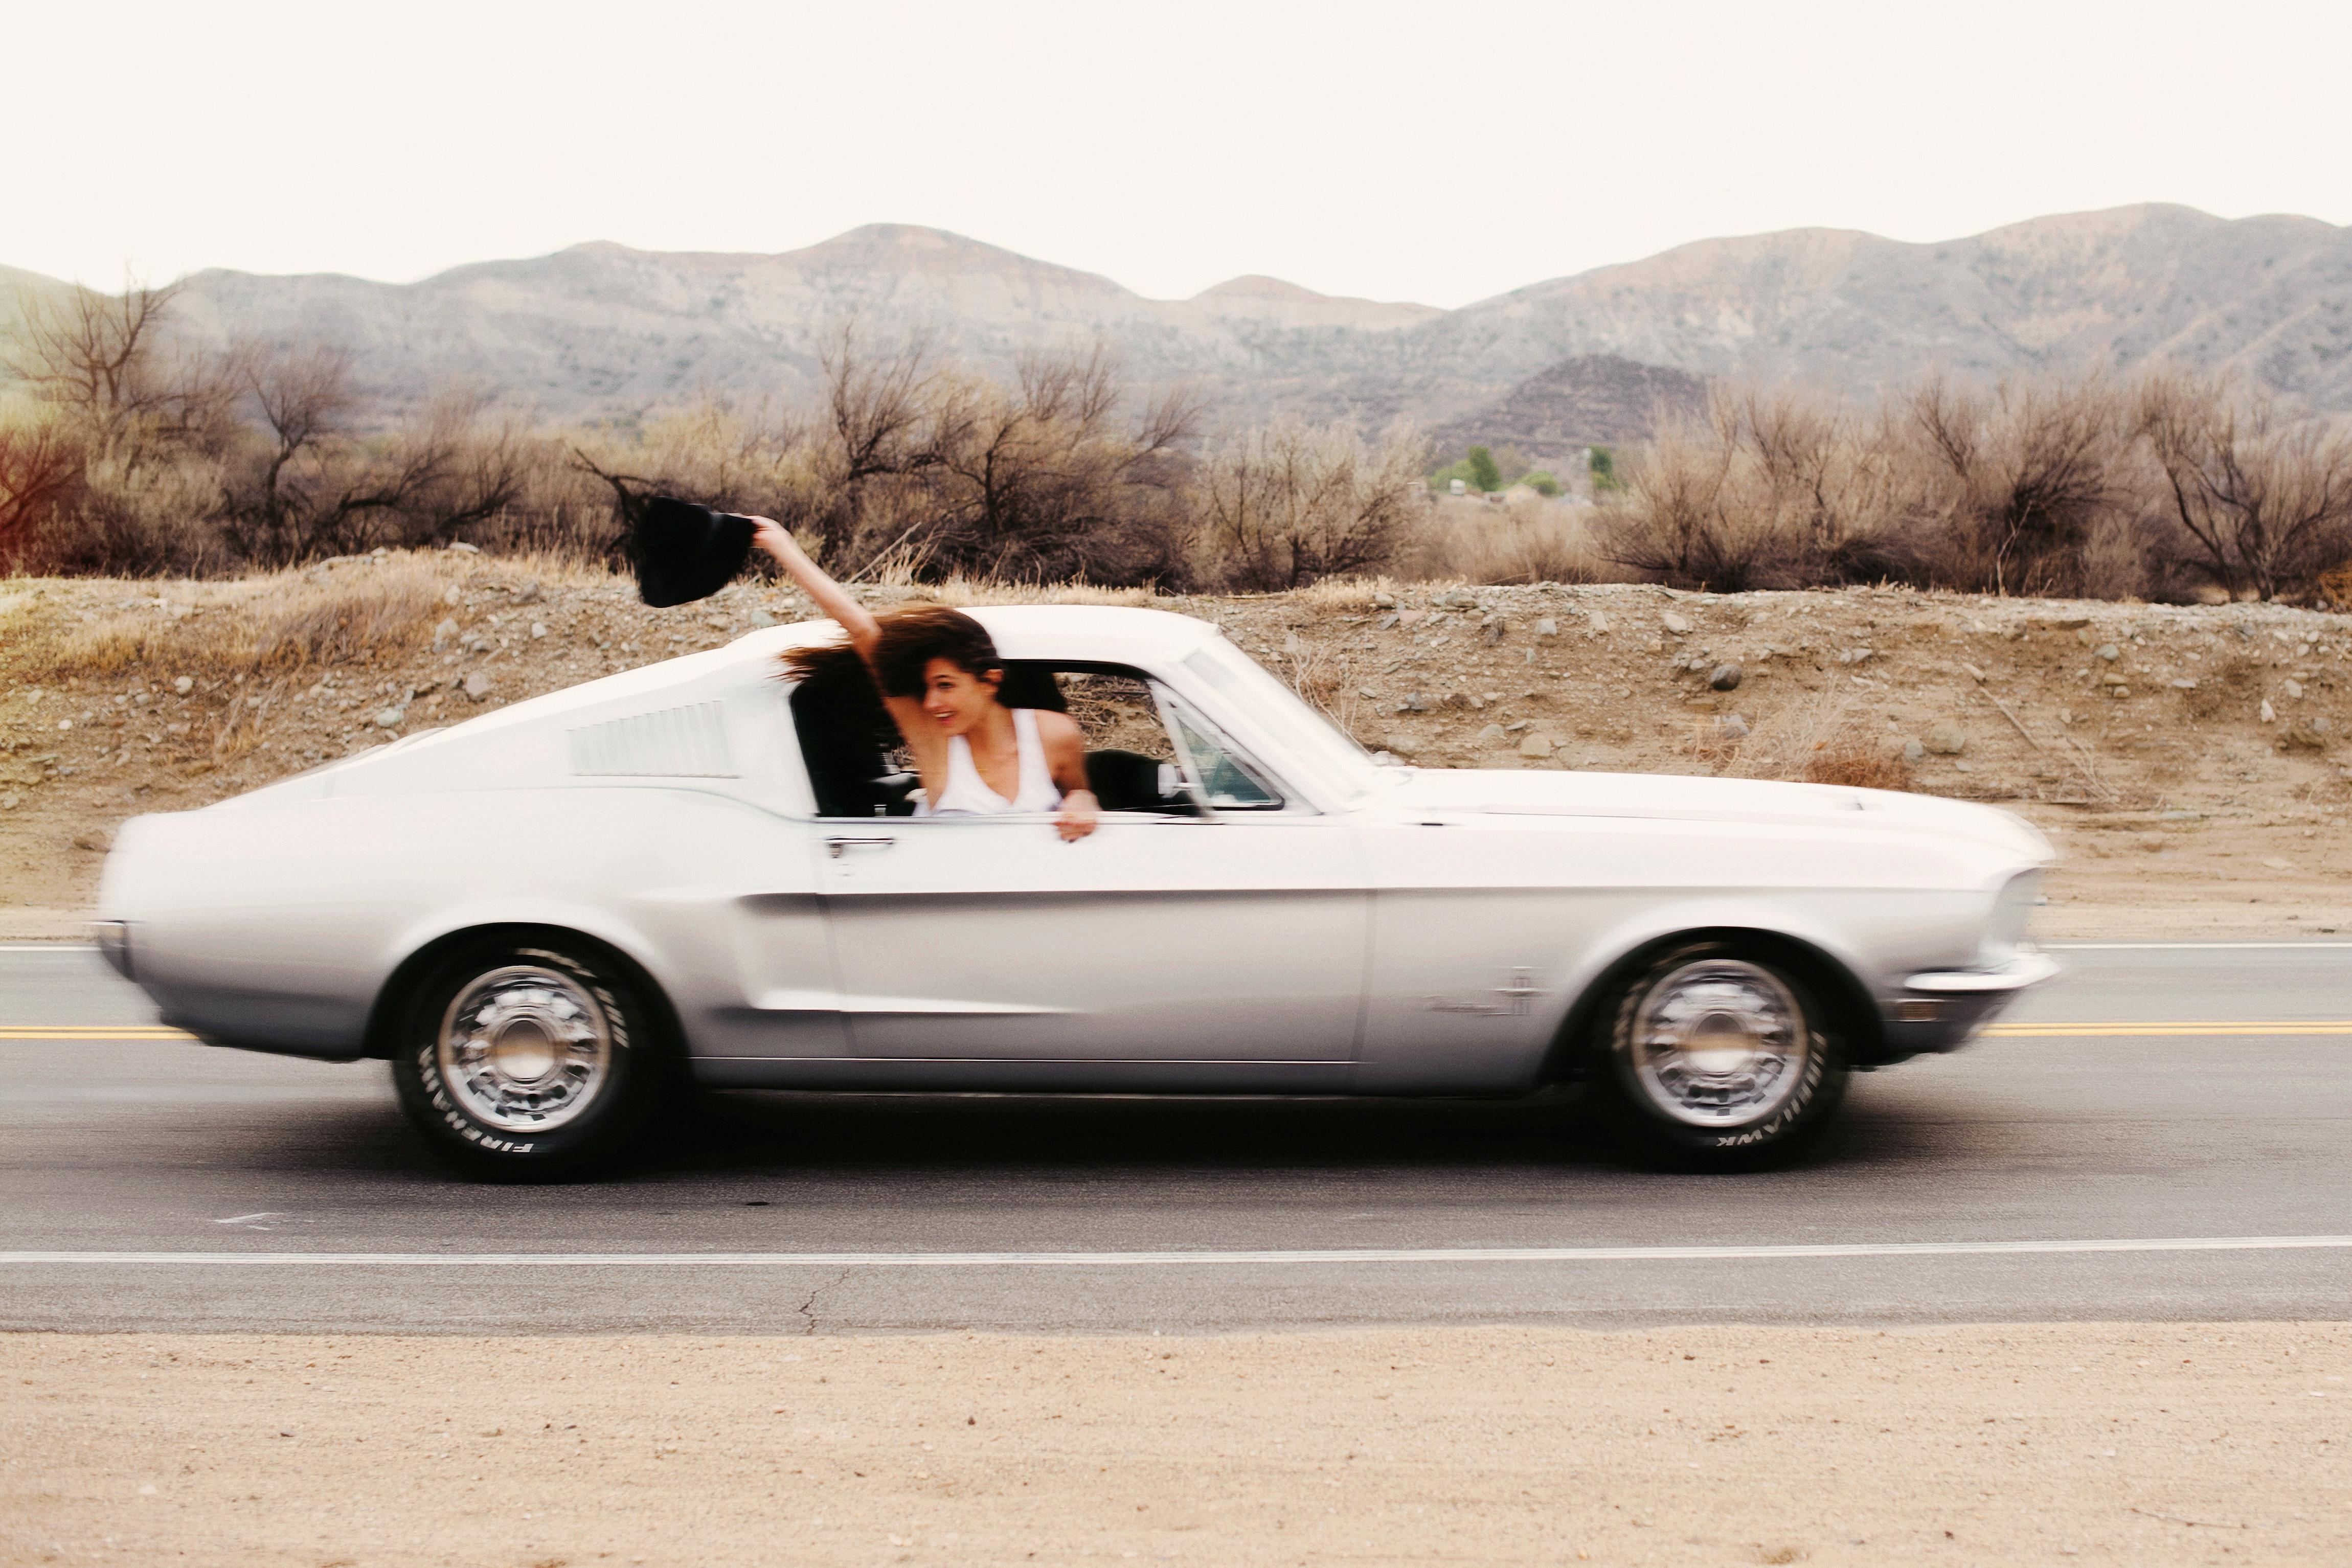 "Untitled 1" (Mustang) Original photography Edition 2/7 by Larsen Sotelo 

Untitled 1 
From the Mustang series
Giclee (Archival Ink) print on 310G Platine Fibre Cotton Rag w/satin finish 32” X 24” inch
Limited Edition of 7
2014
Vom Künstler signiert